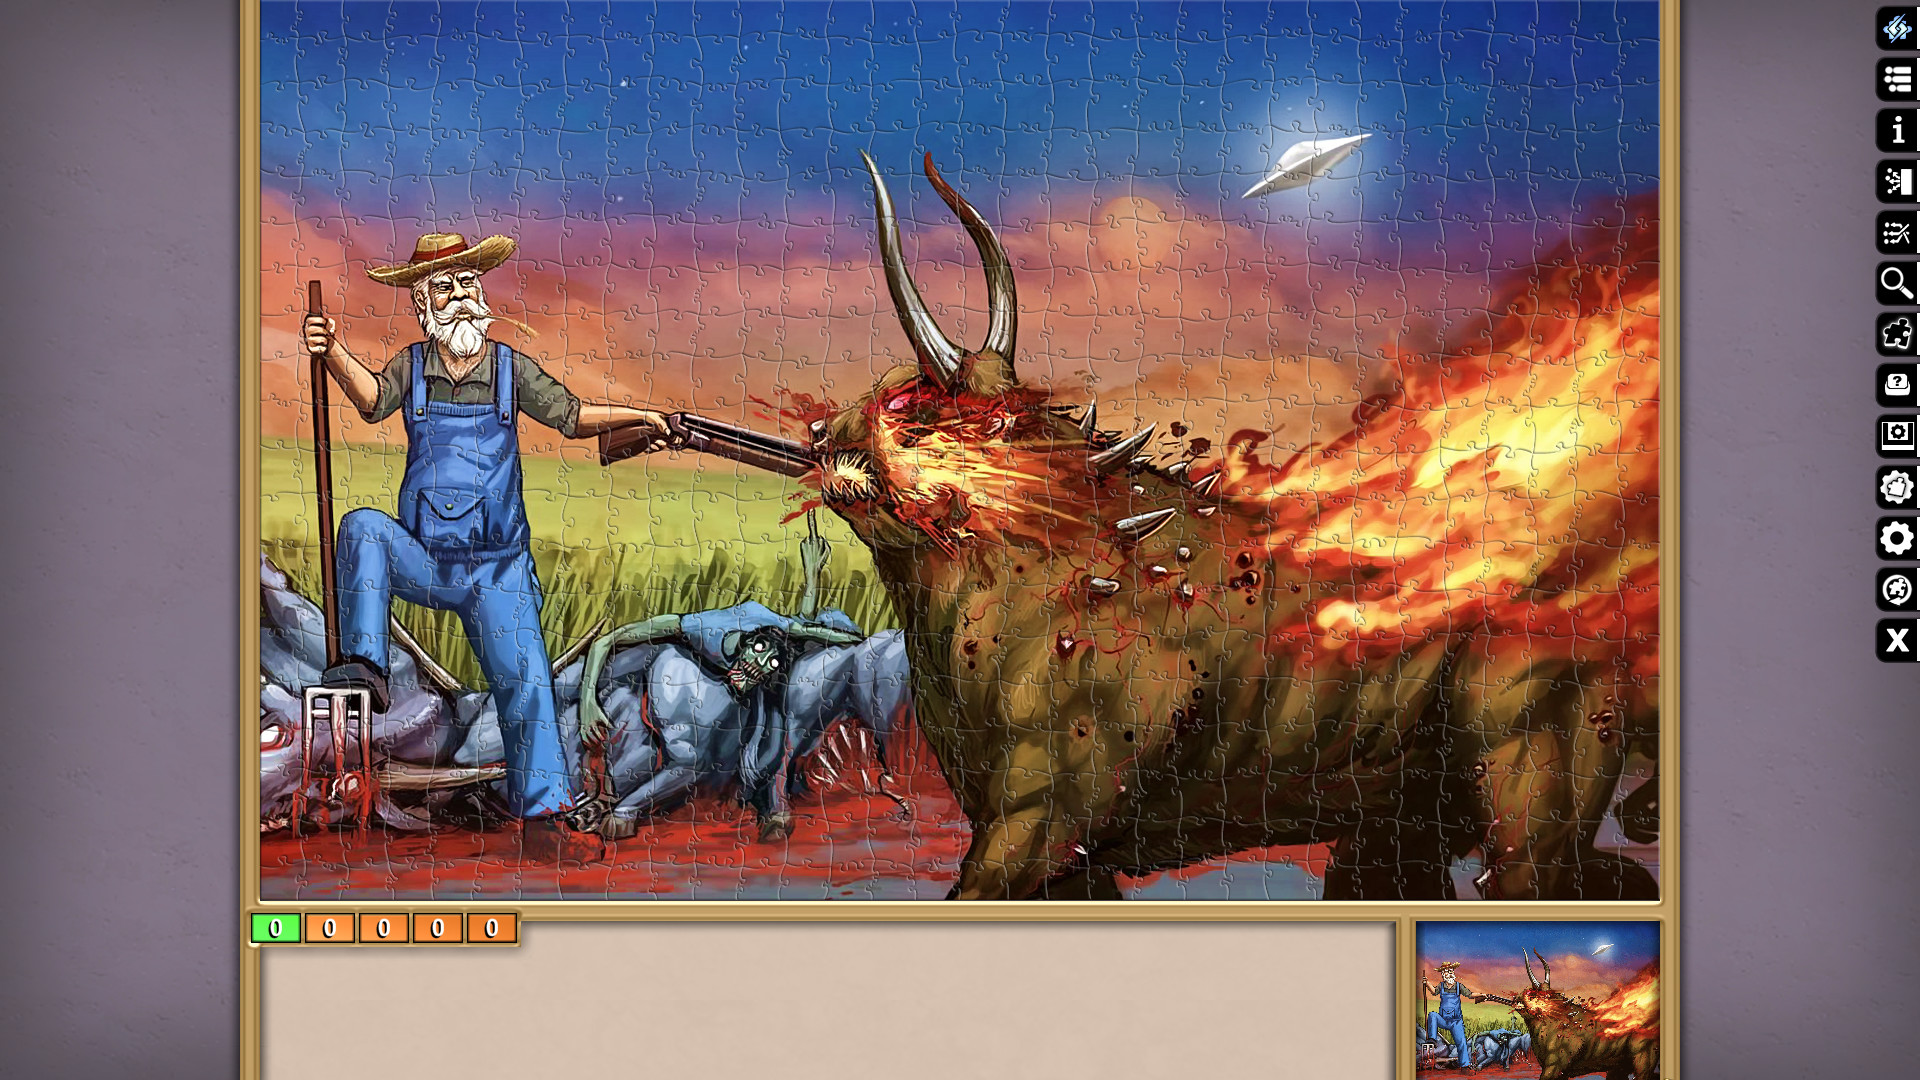 Jigsaw Puzzle Pack - Pixel Puzzles Ultimate: T.C.O.T.C Featured Screenshot #1